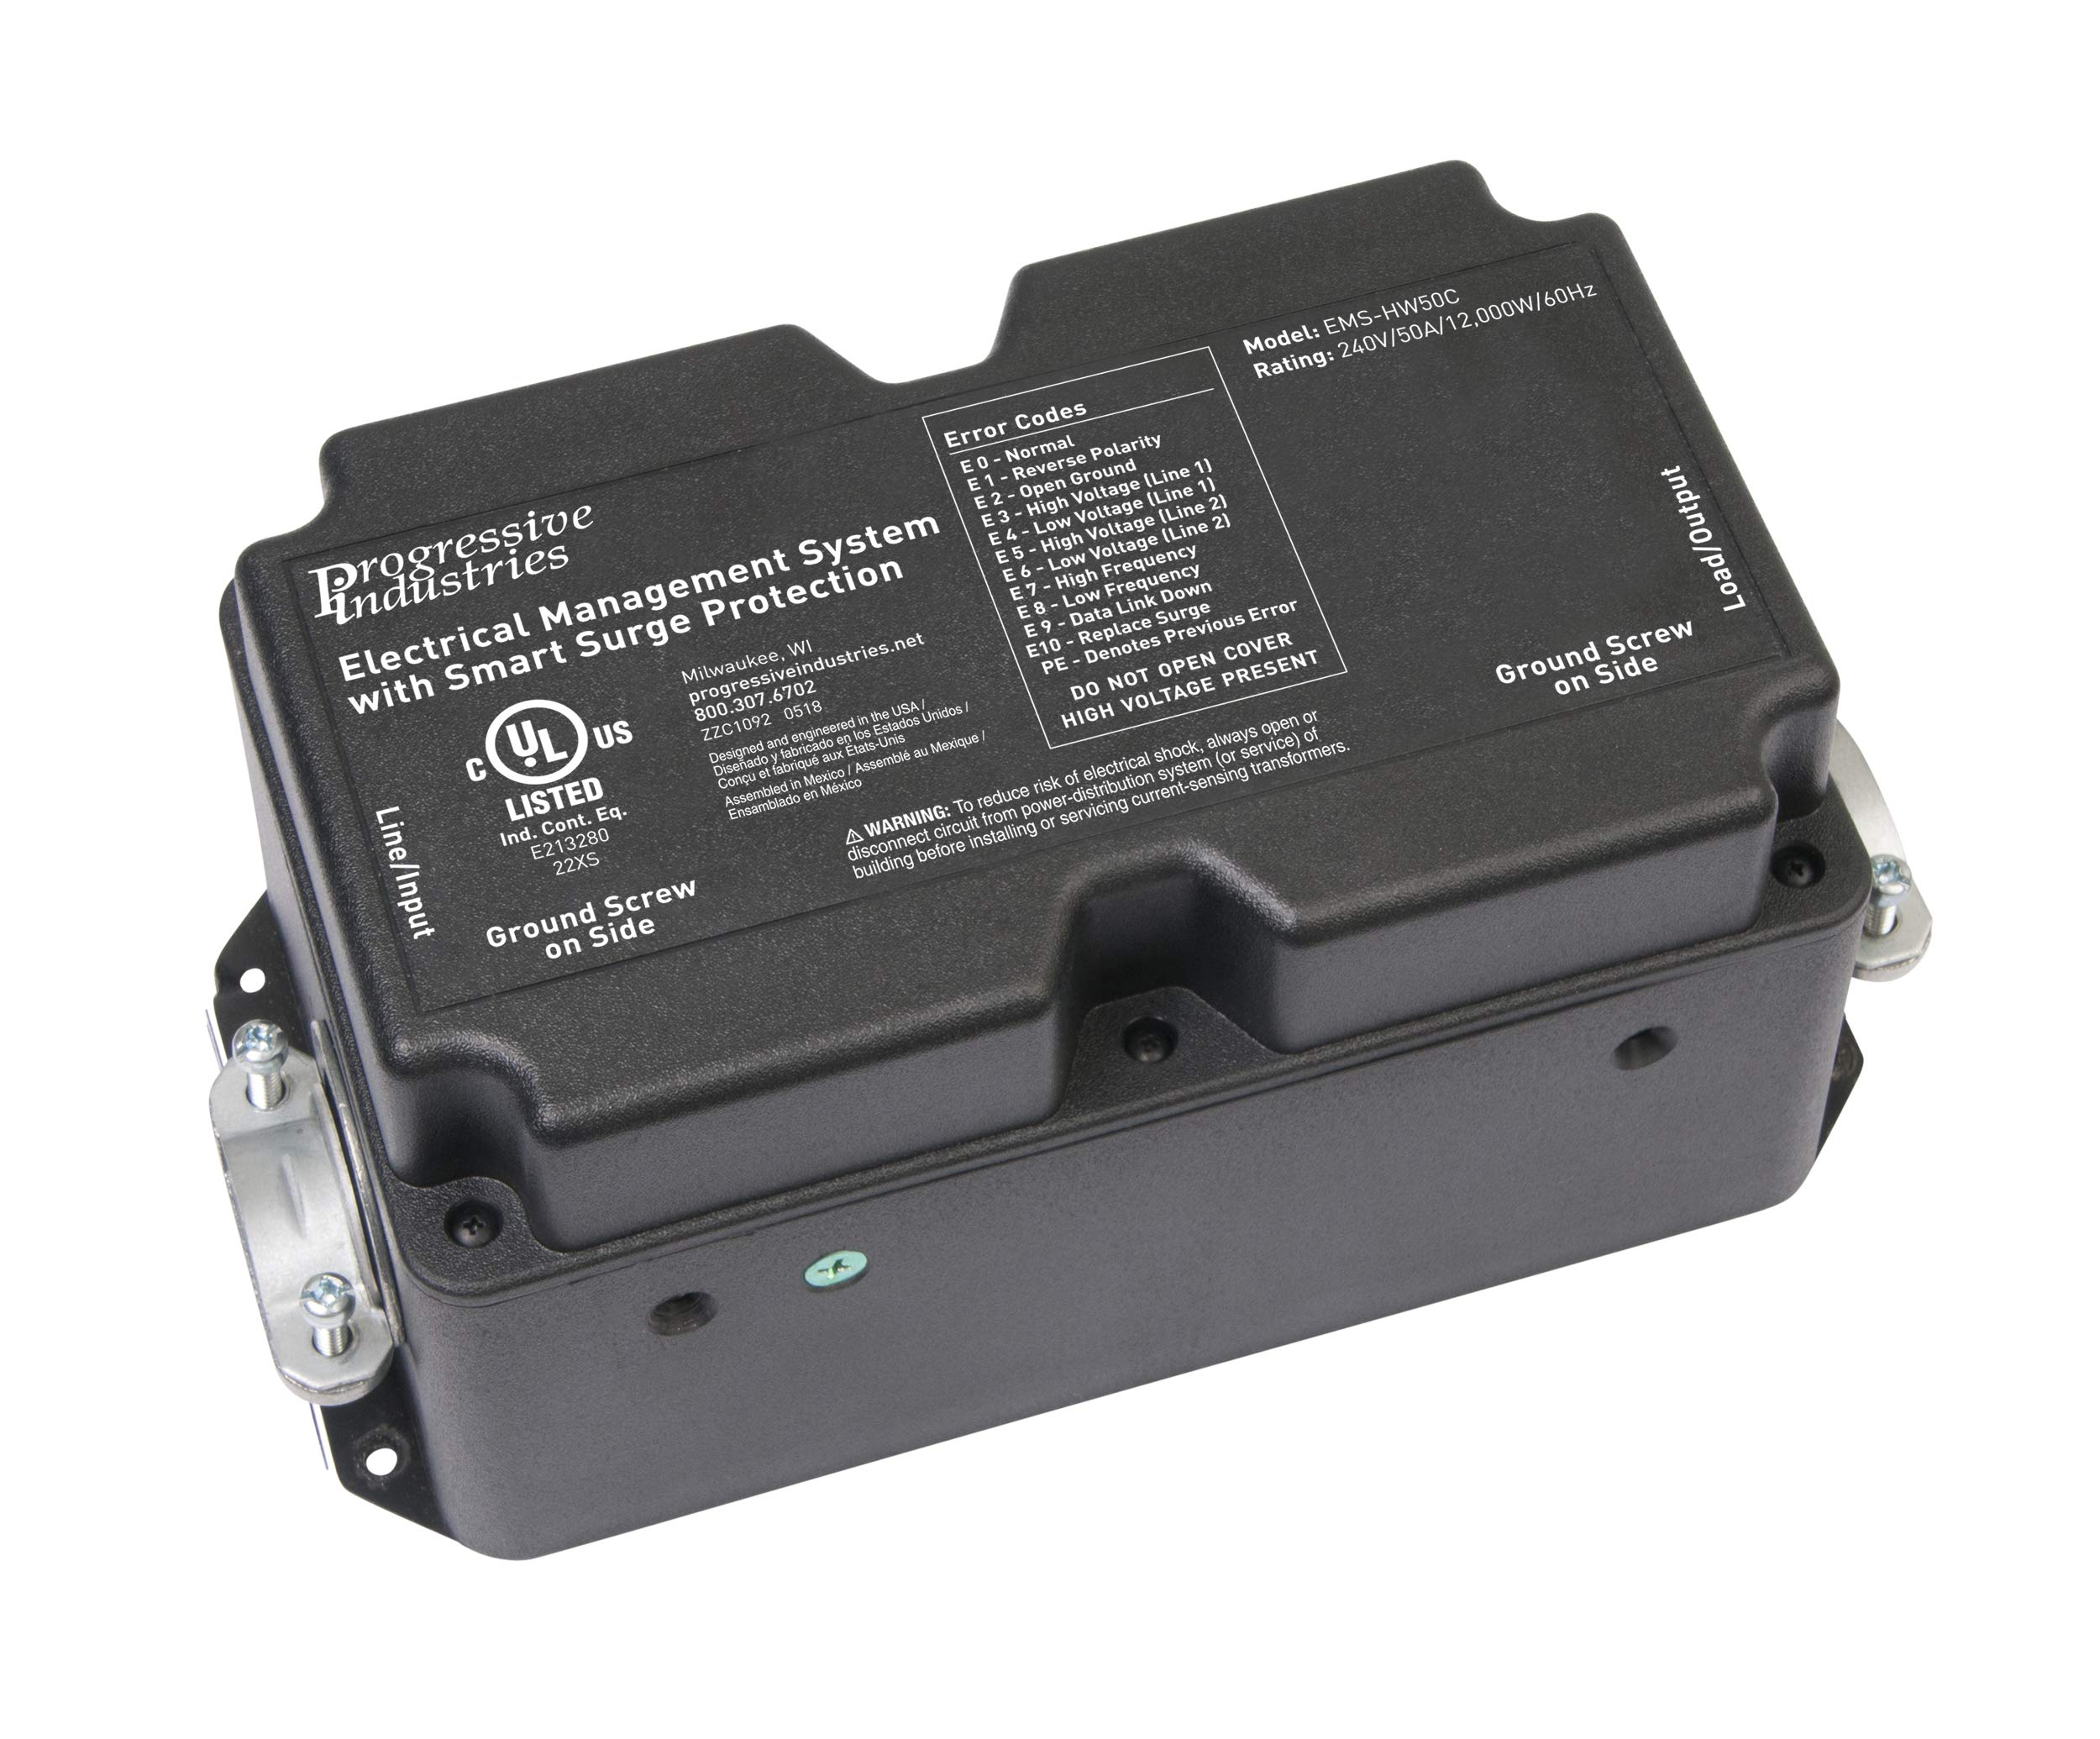 Progressive Industries RV Surge Protector, Available in 30/50 Amp, Portable and Hardwired Options.